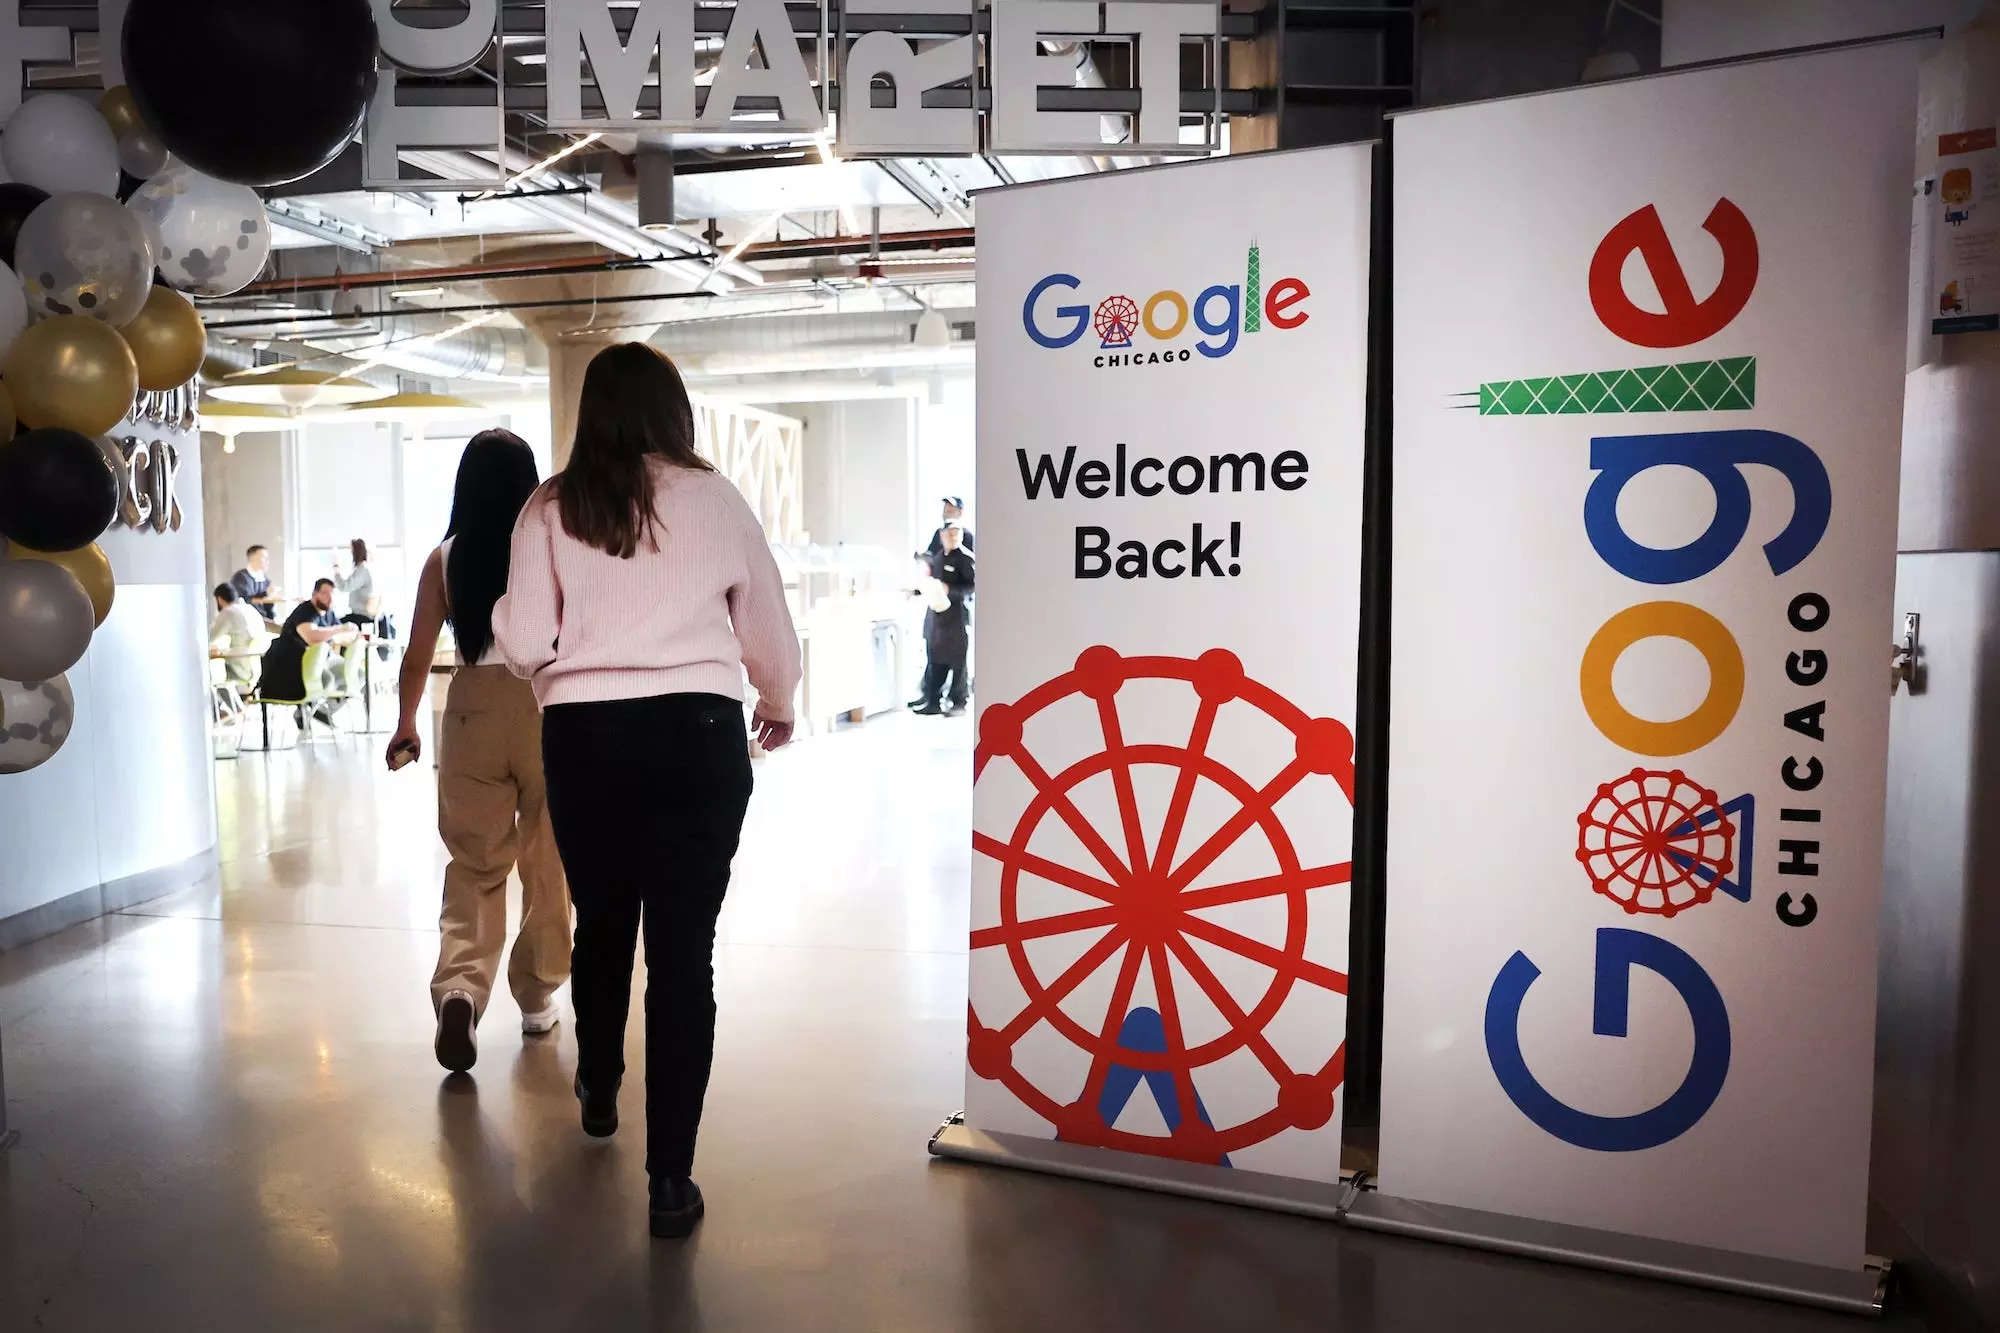 Google employees walk into a cafeteria at Google